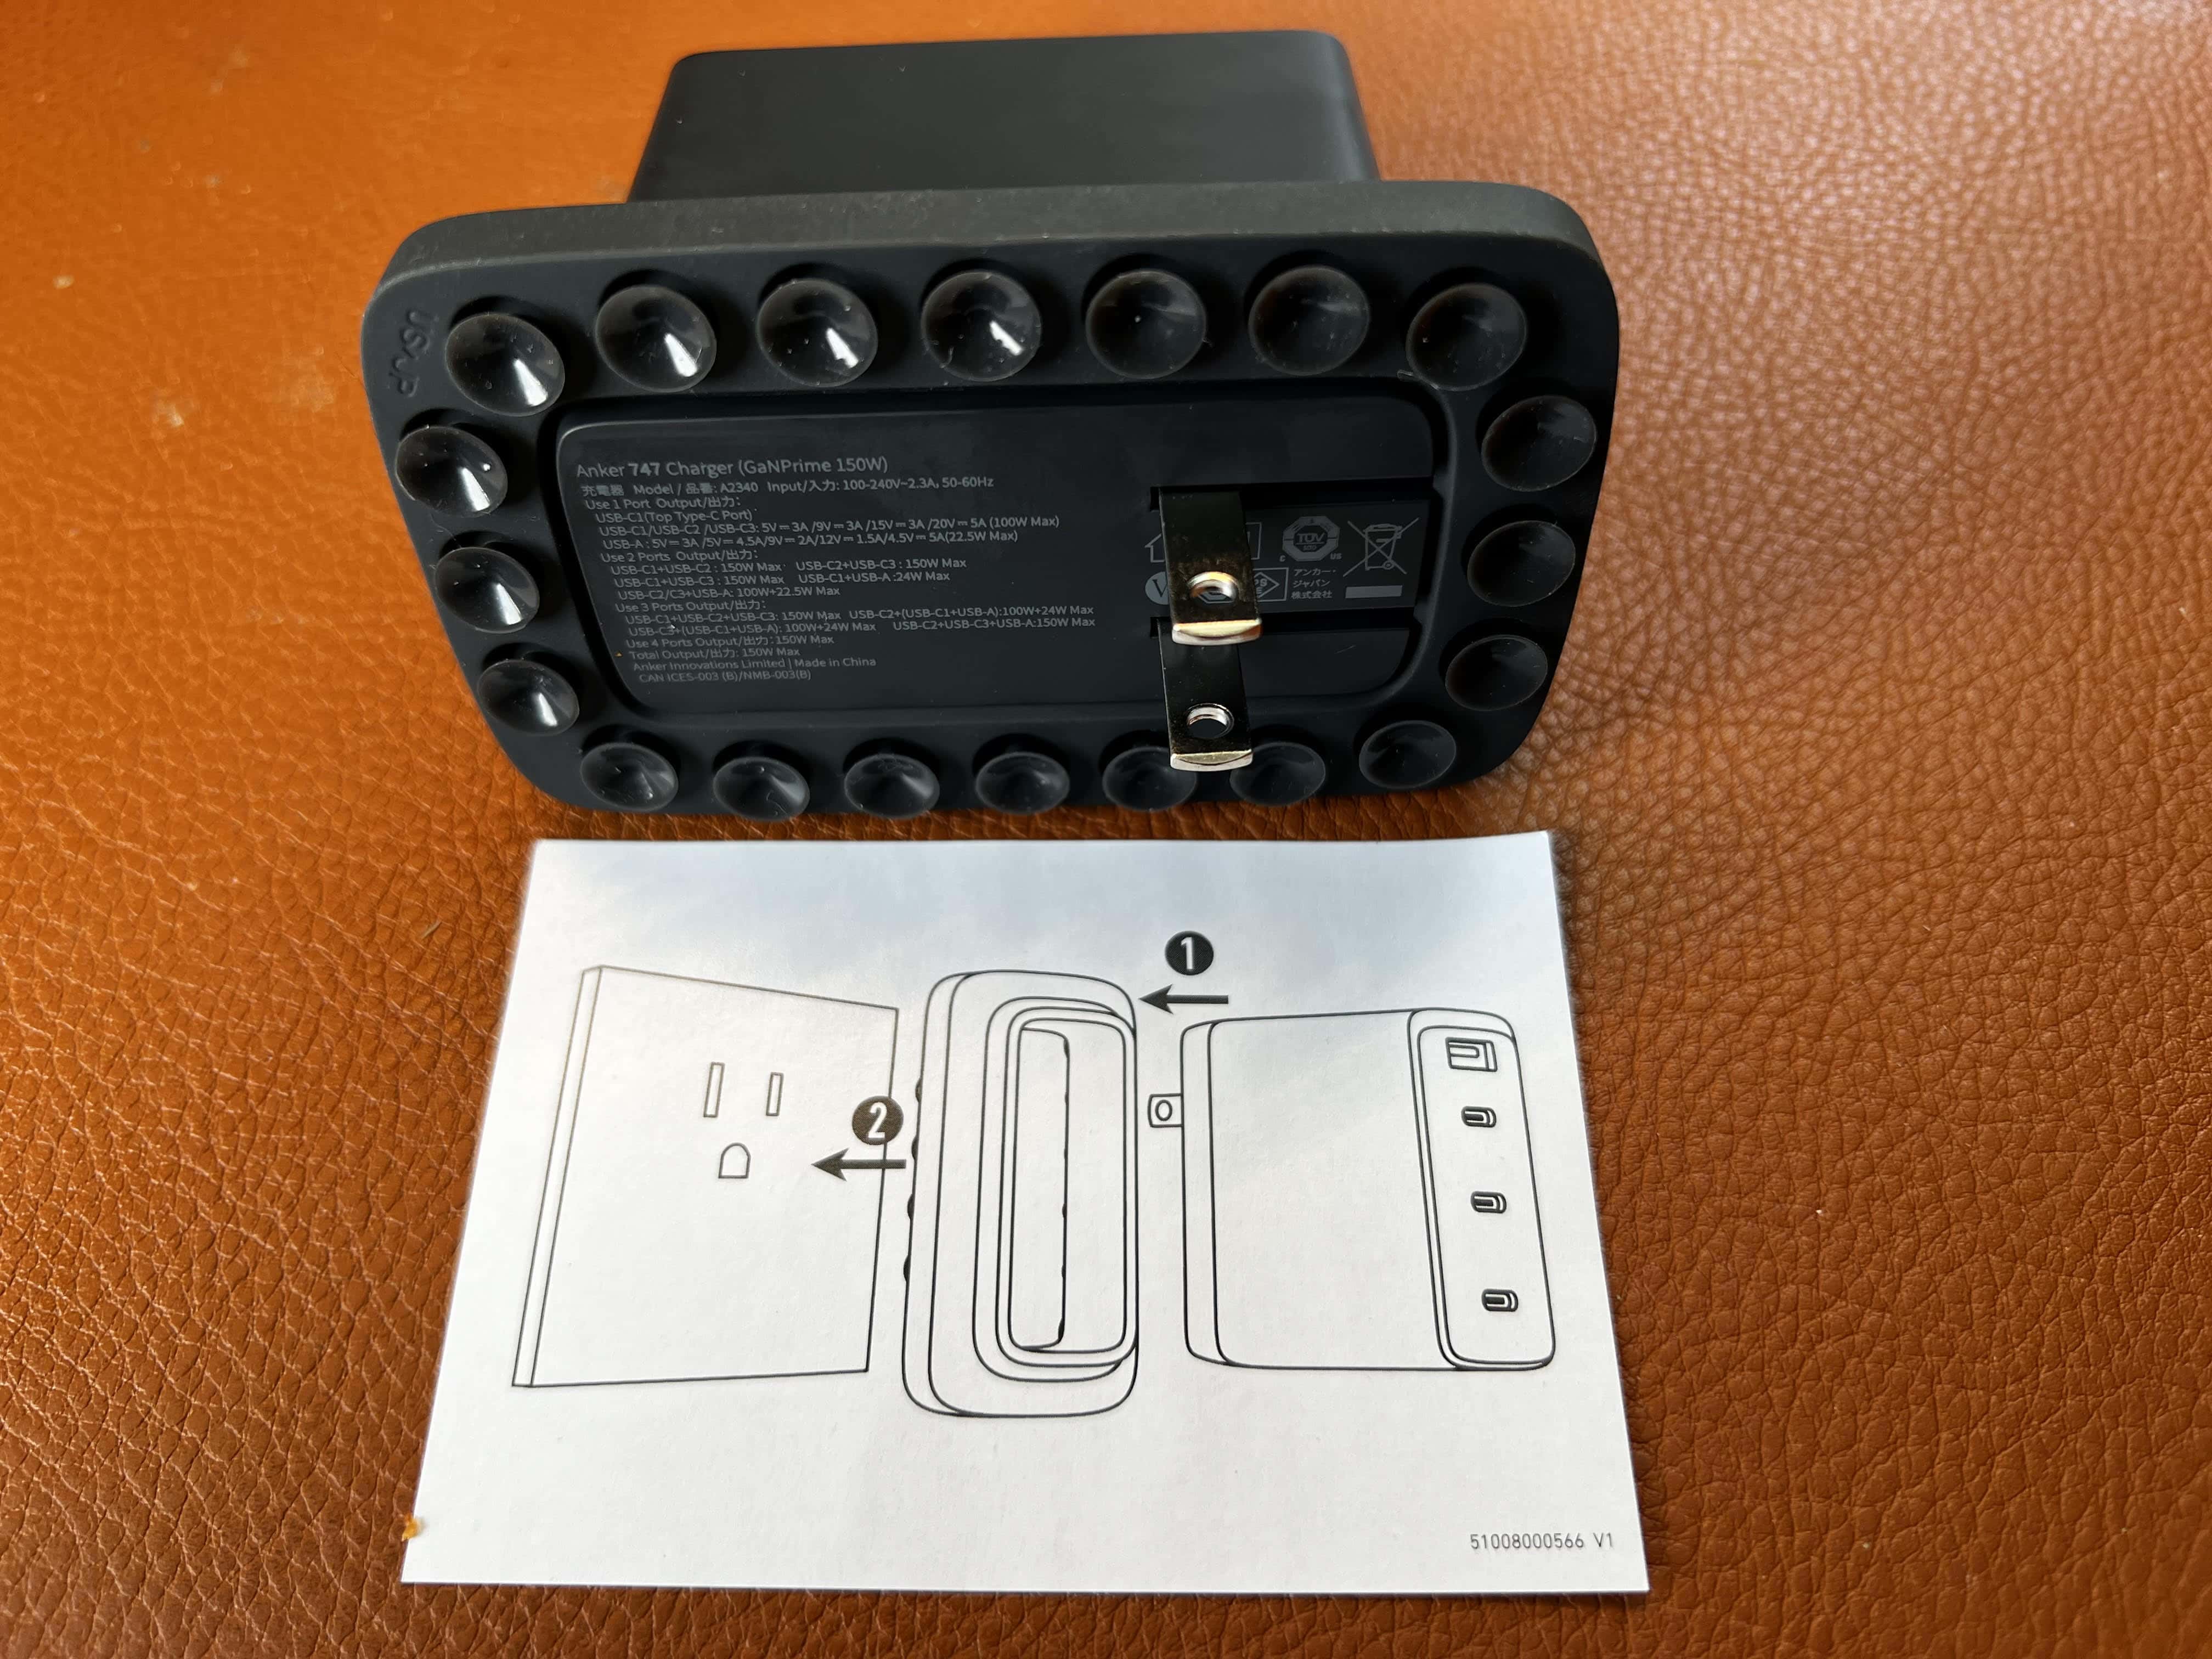 Compact Anker 747 GanPrime Charger packs 150W of power [Review 